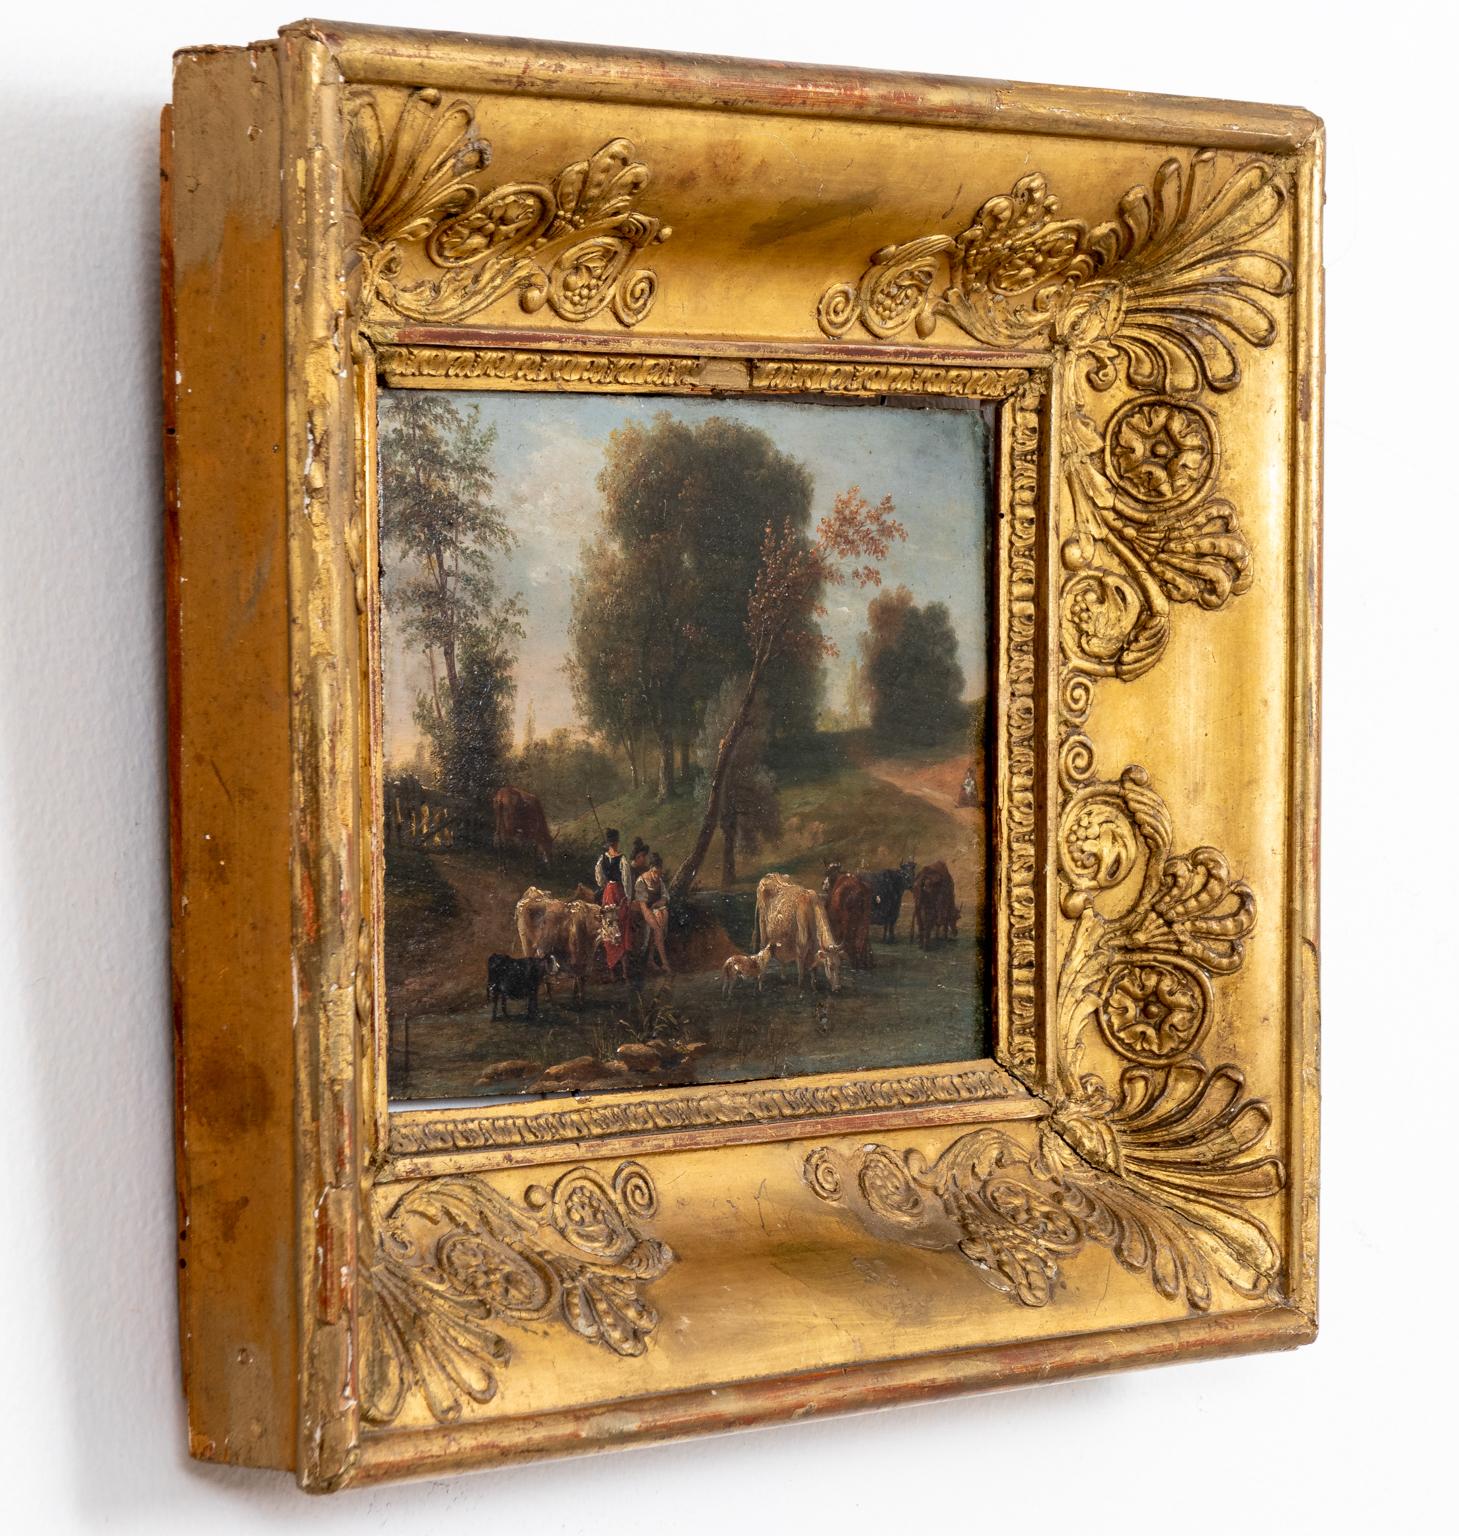 Circa 1800s oil on board by Guillaume Frederik Ronmy titled 